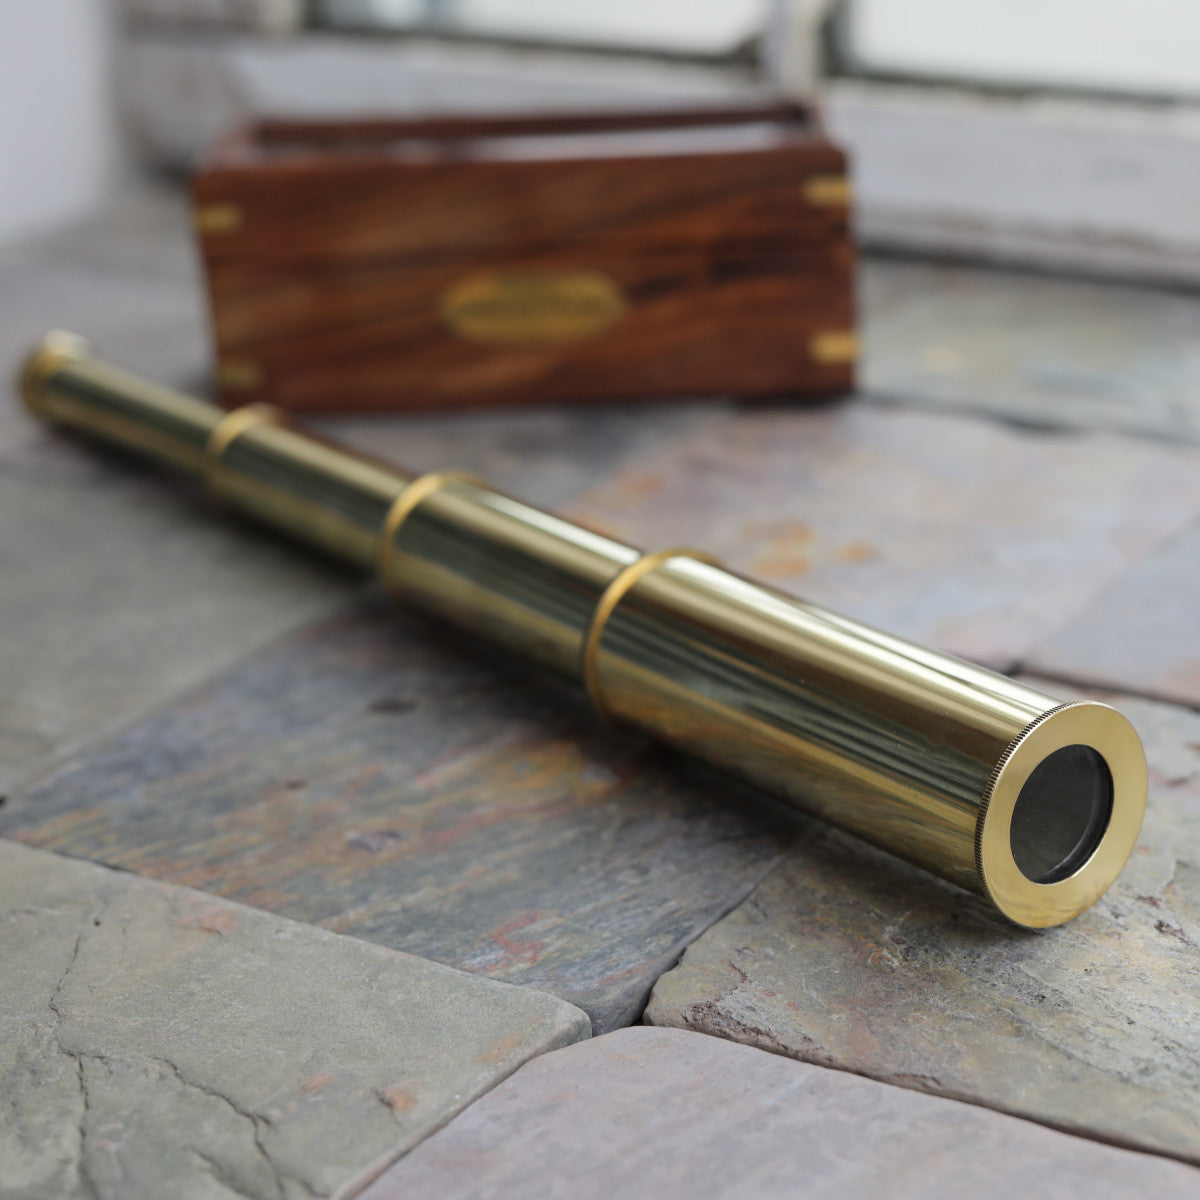 At Auction: early 1900's brass telescope w/ working wooden legs